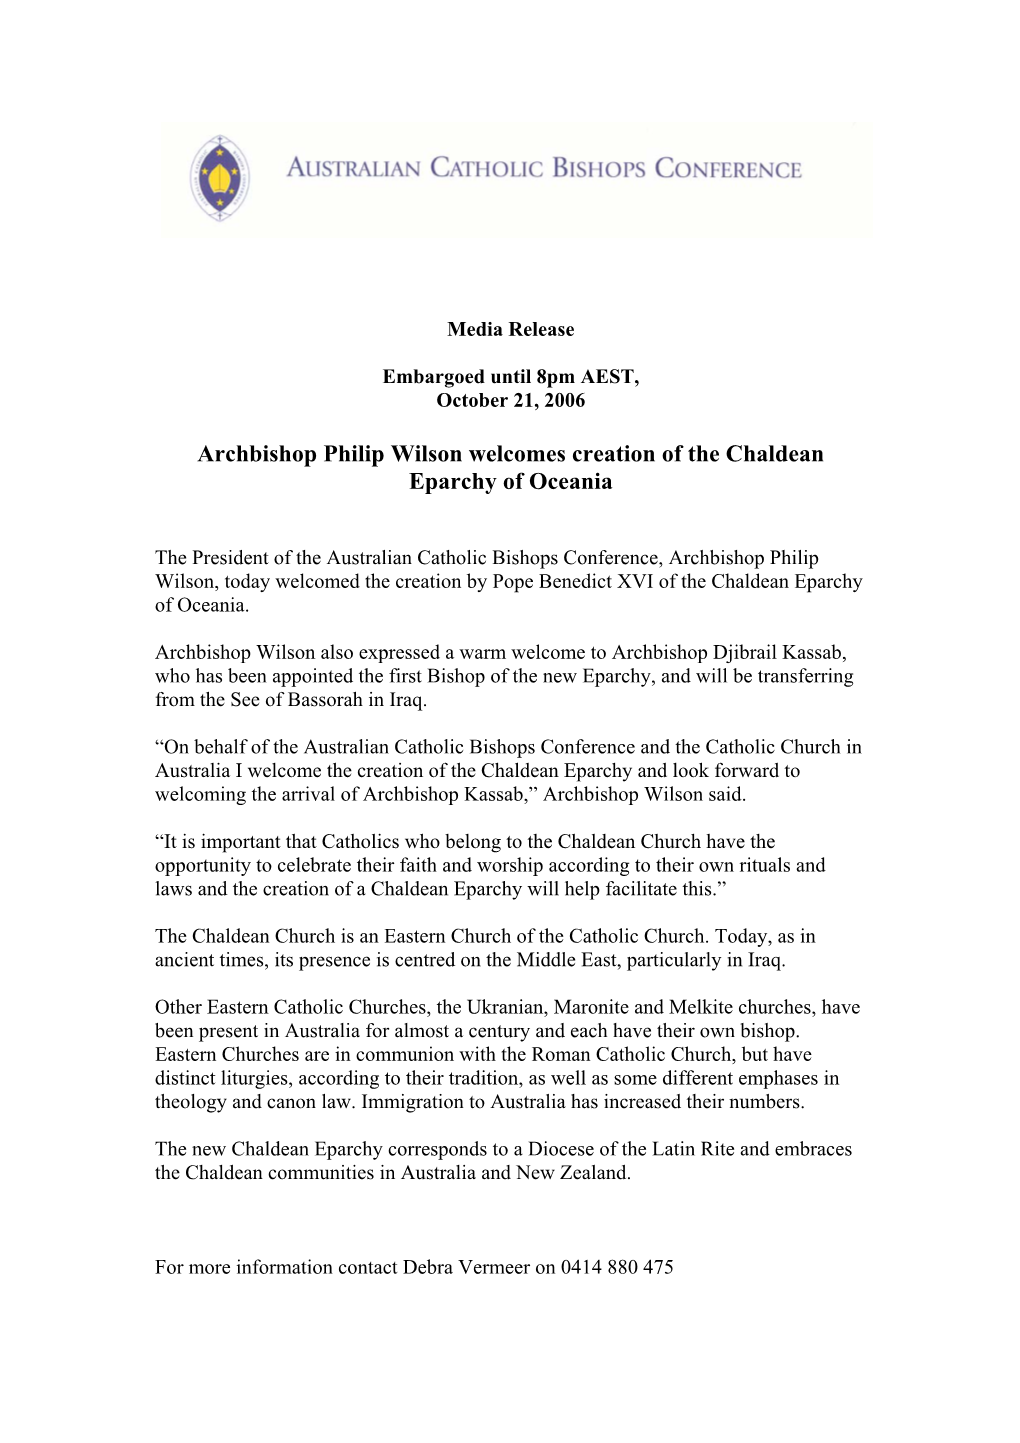 Archbishop Philip Wilson Welcomes Creation of the Chaldean Eparchy of Oceania